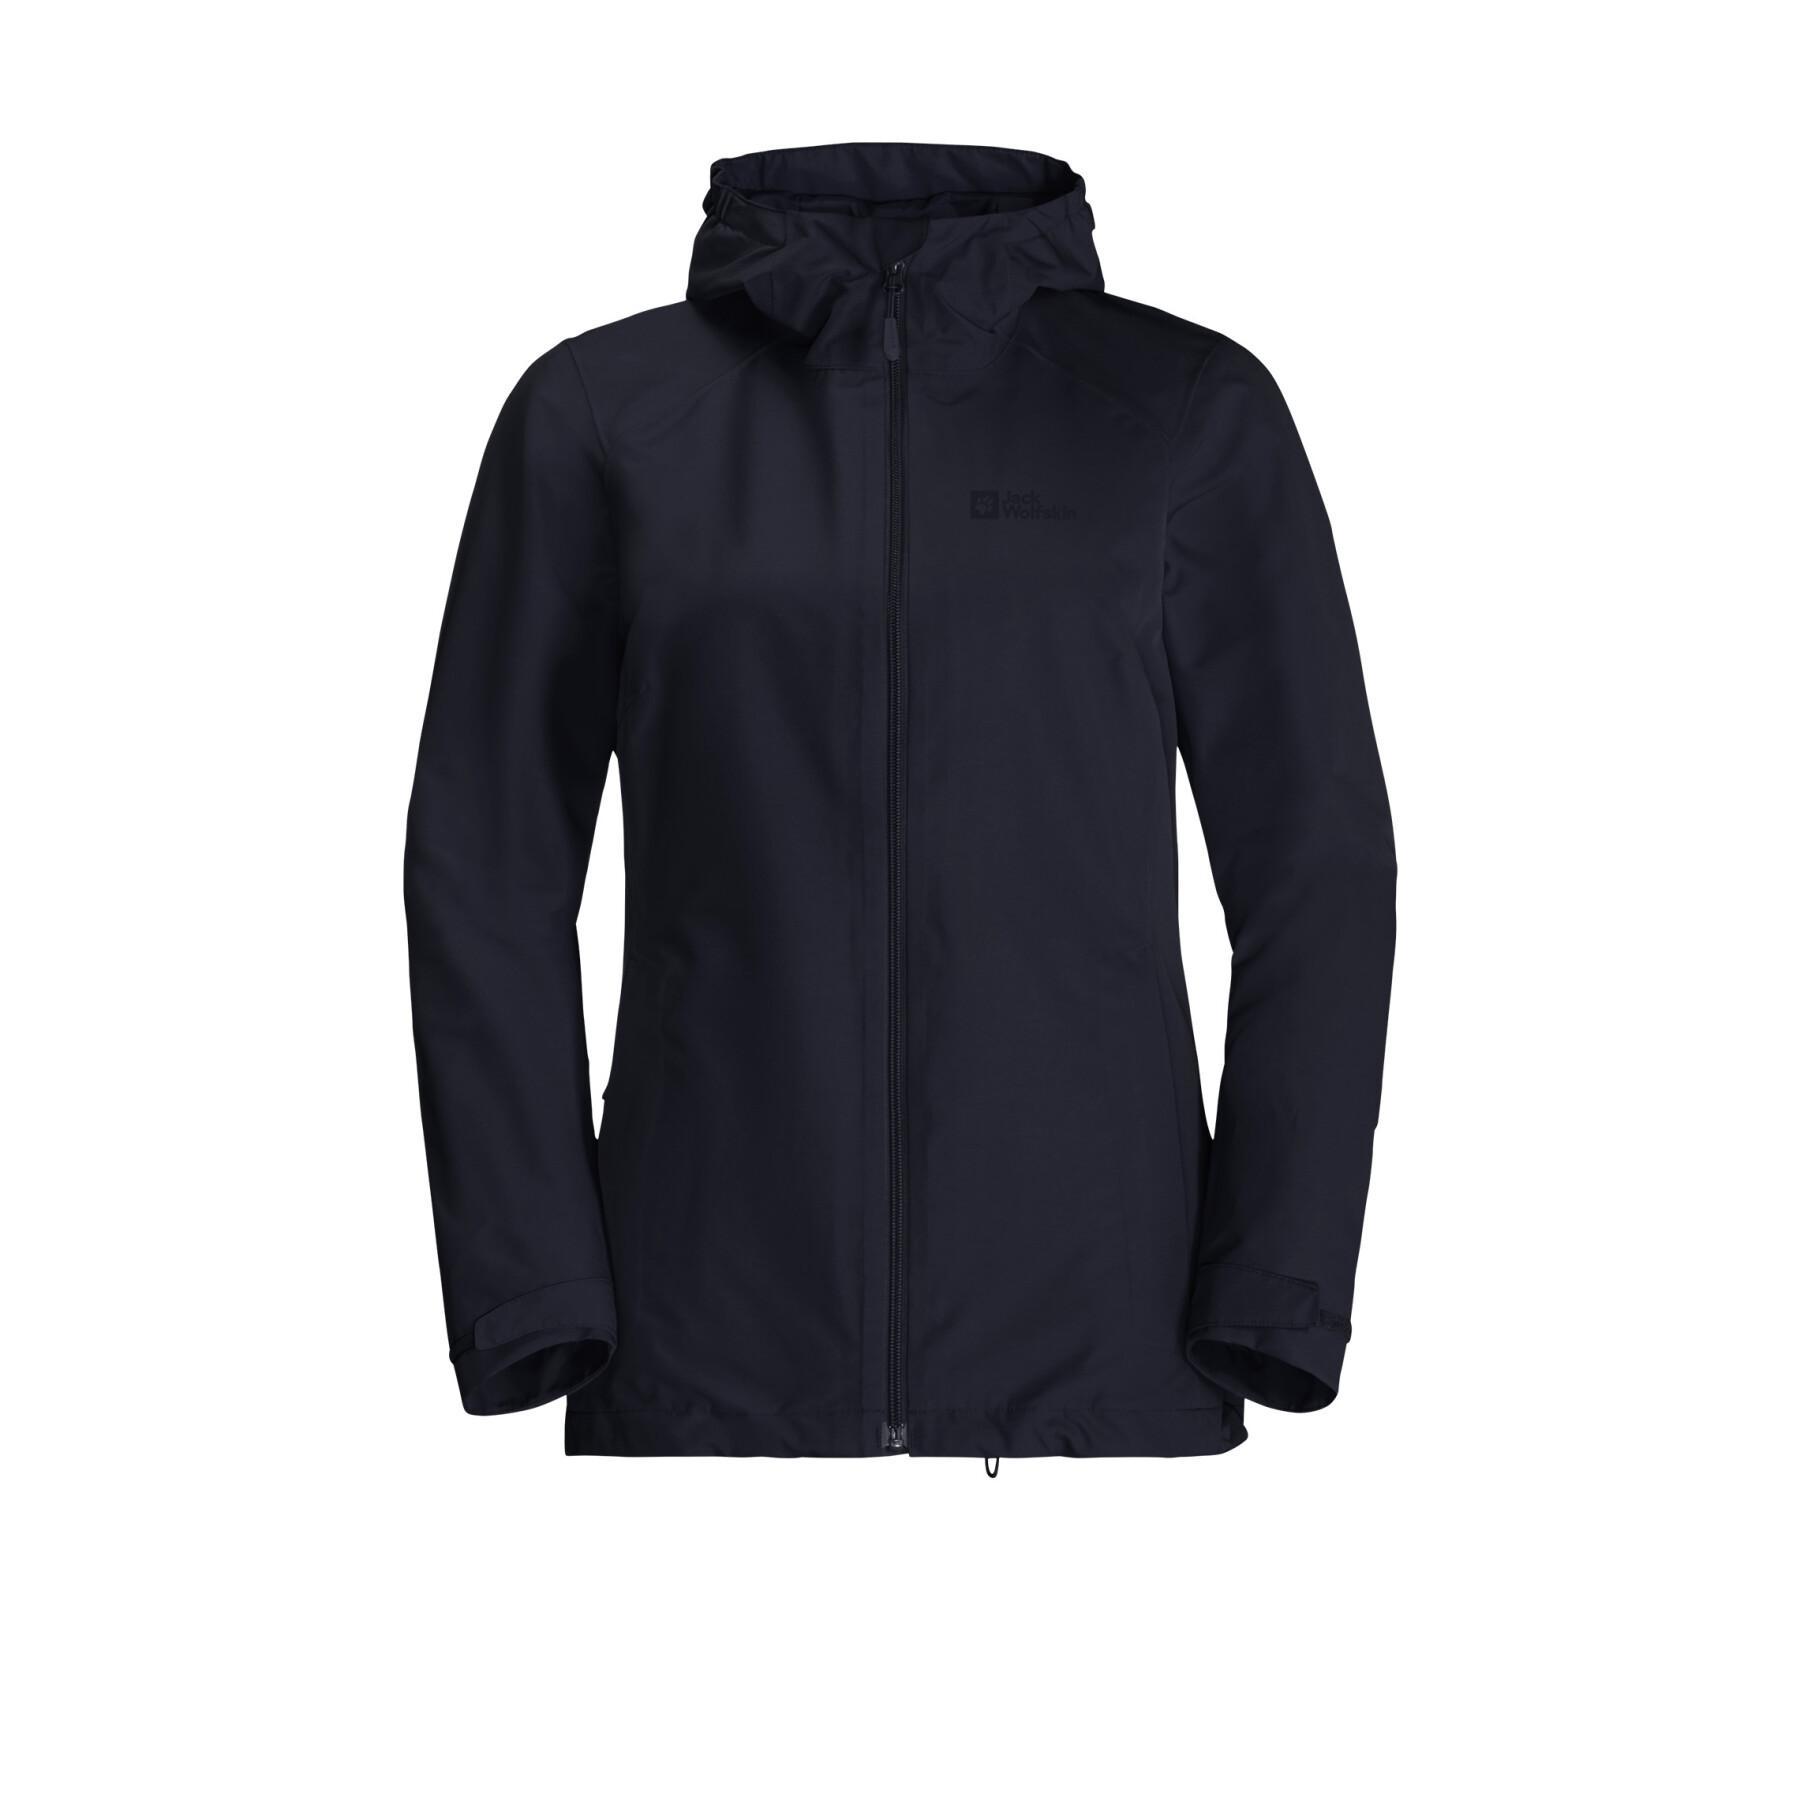 Chaqueta impermeable para mujer Jack Wolfskin Besler